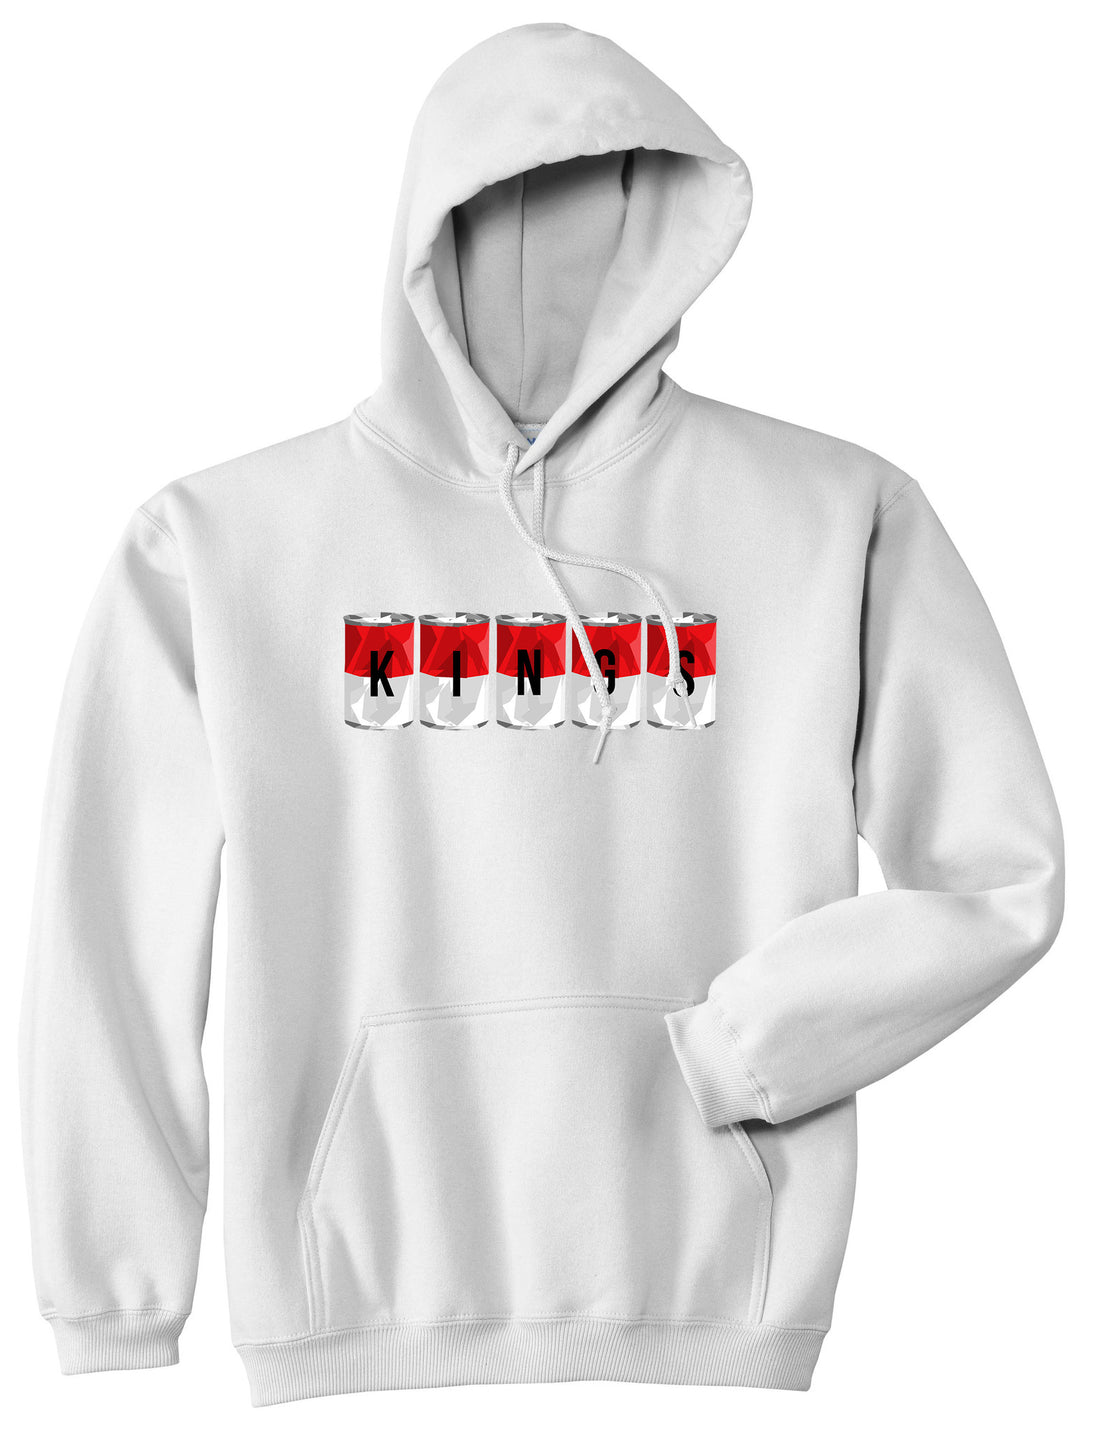 Tomato Soup Cans Pullover Hoodie in White